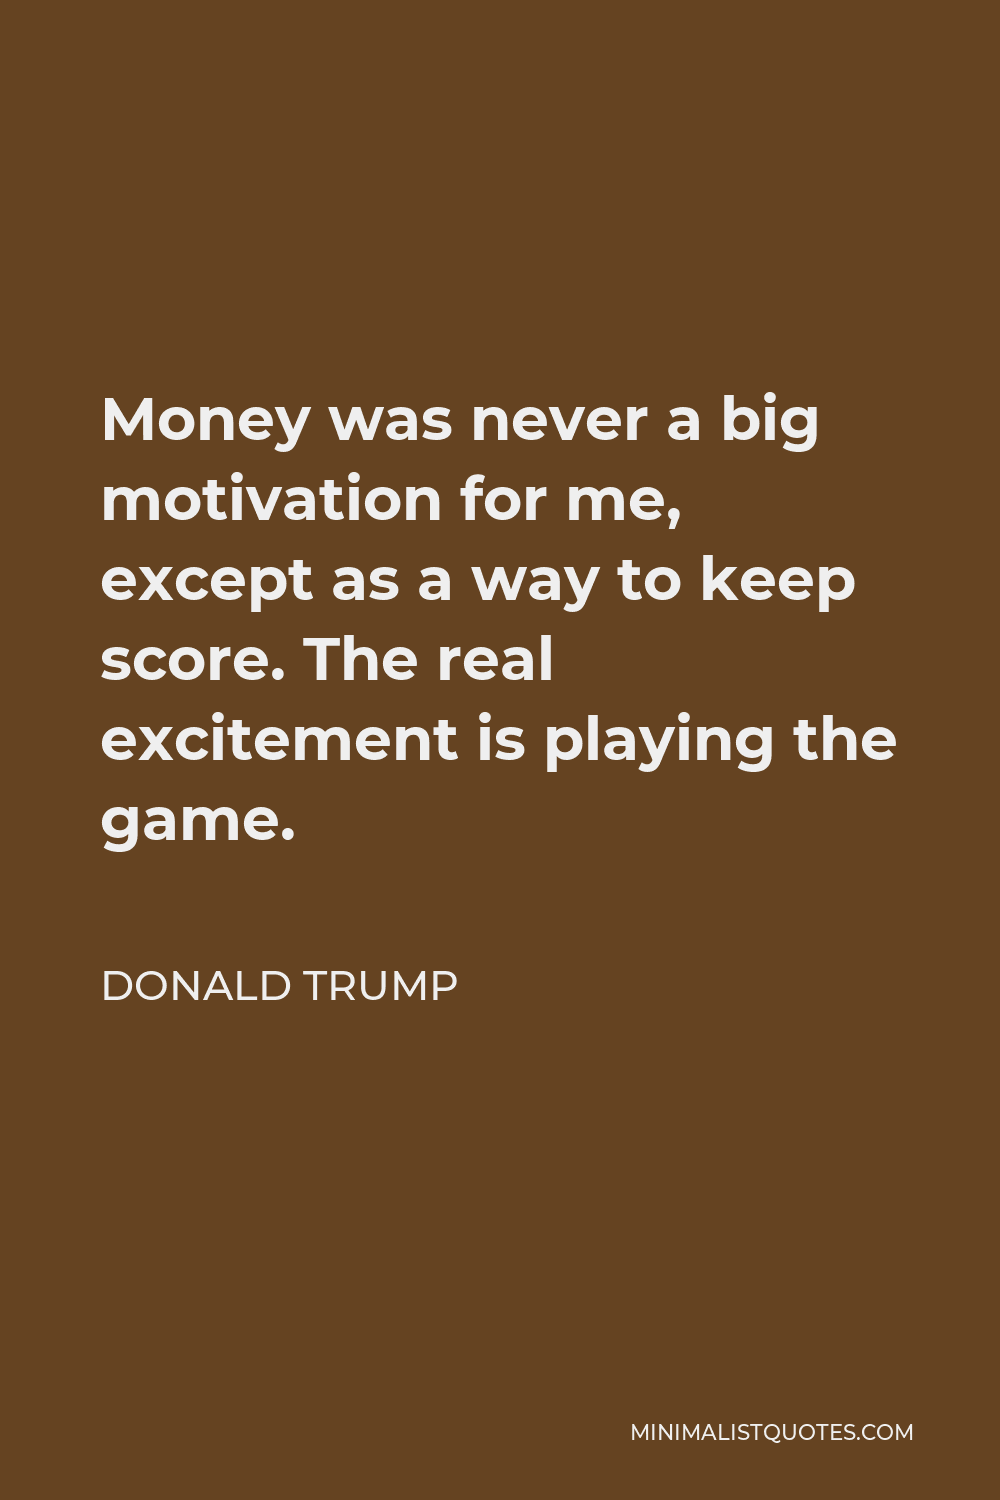 Donald Trump Quote - Money was never a big motivation for me, except as a way to keep score. The real excitement is playing the game.